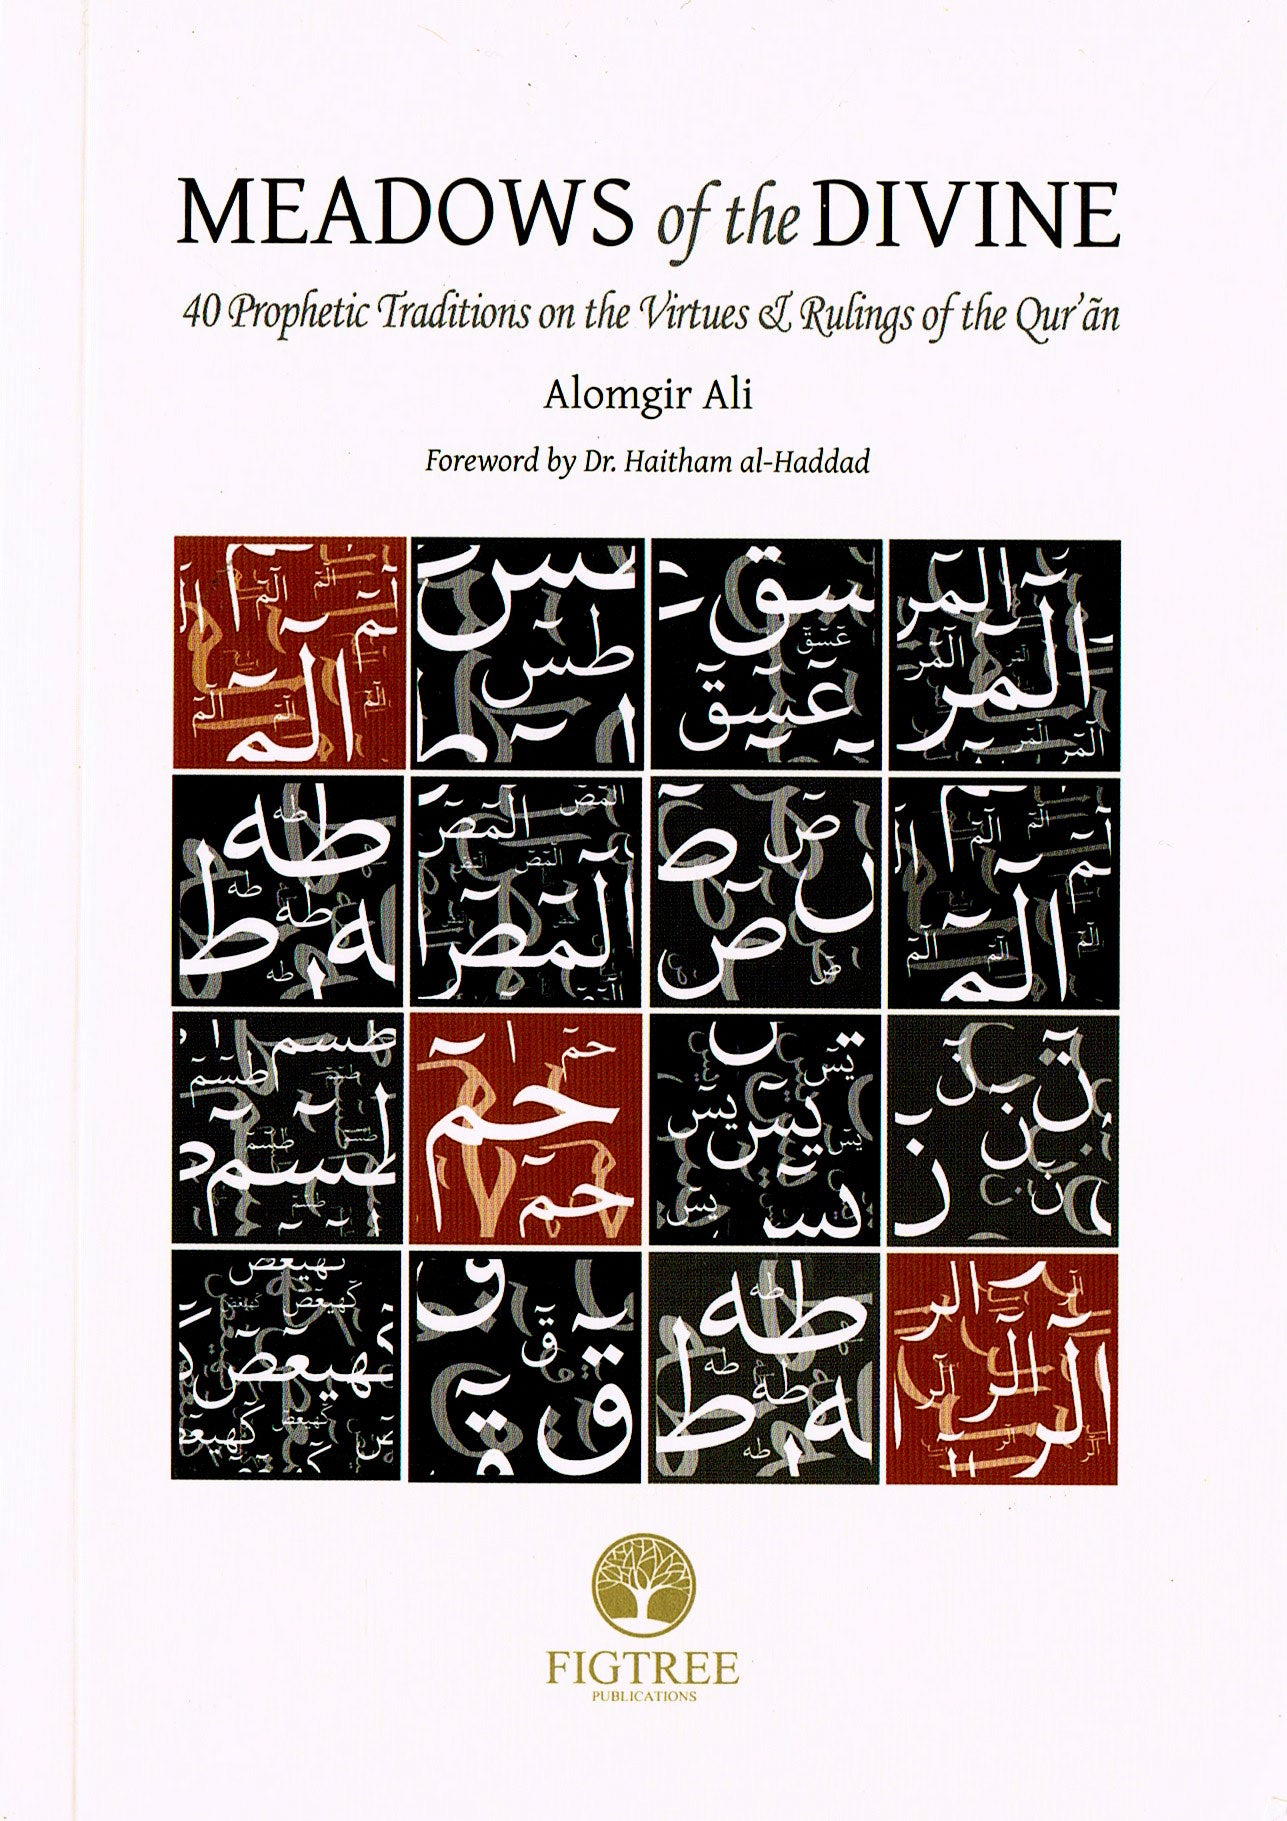 Meadows of the Divine - 40 Prophetic Traditions on the Virtues & Rulings of the Qur'an